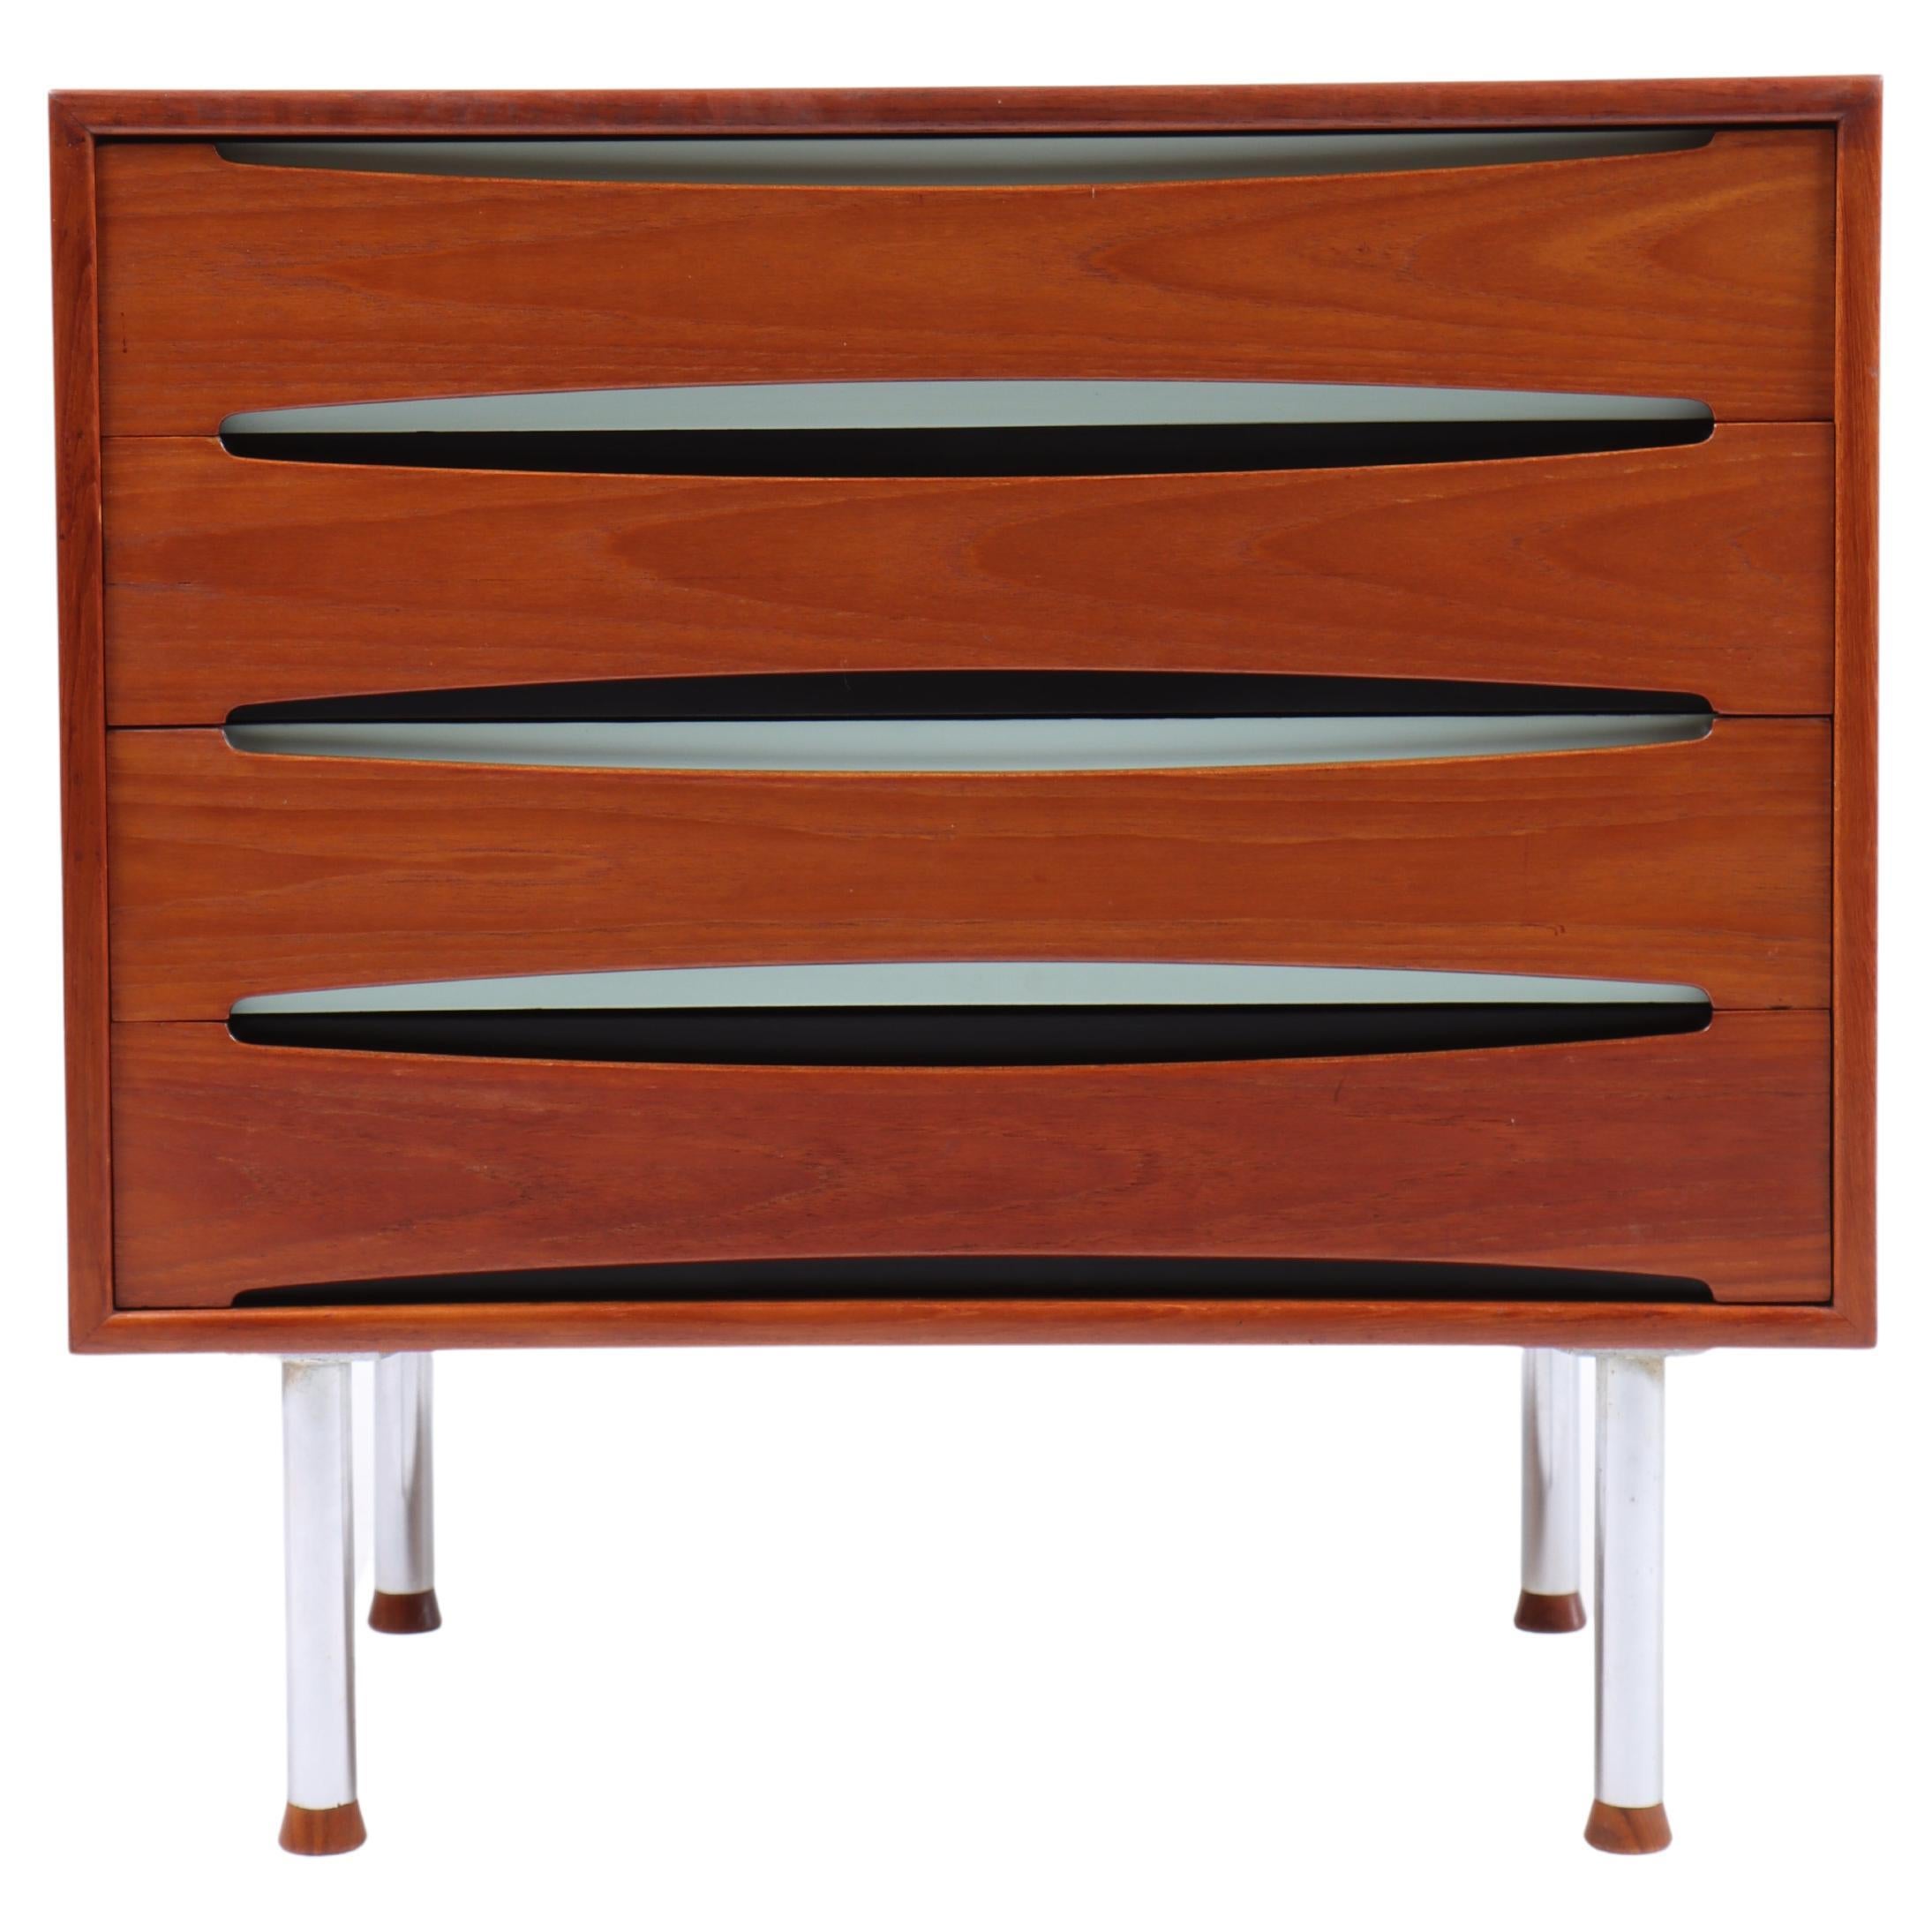 Rare Midcentury Chest of Drawers in Teak by Skovby, 1960s